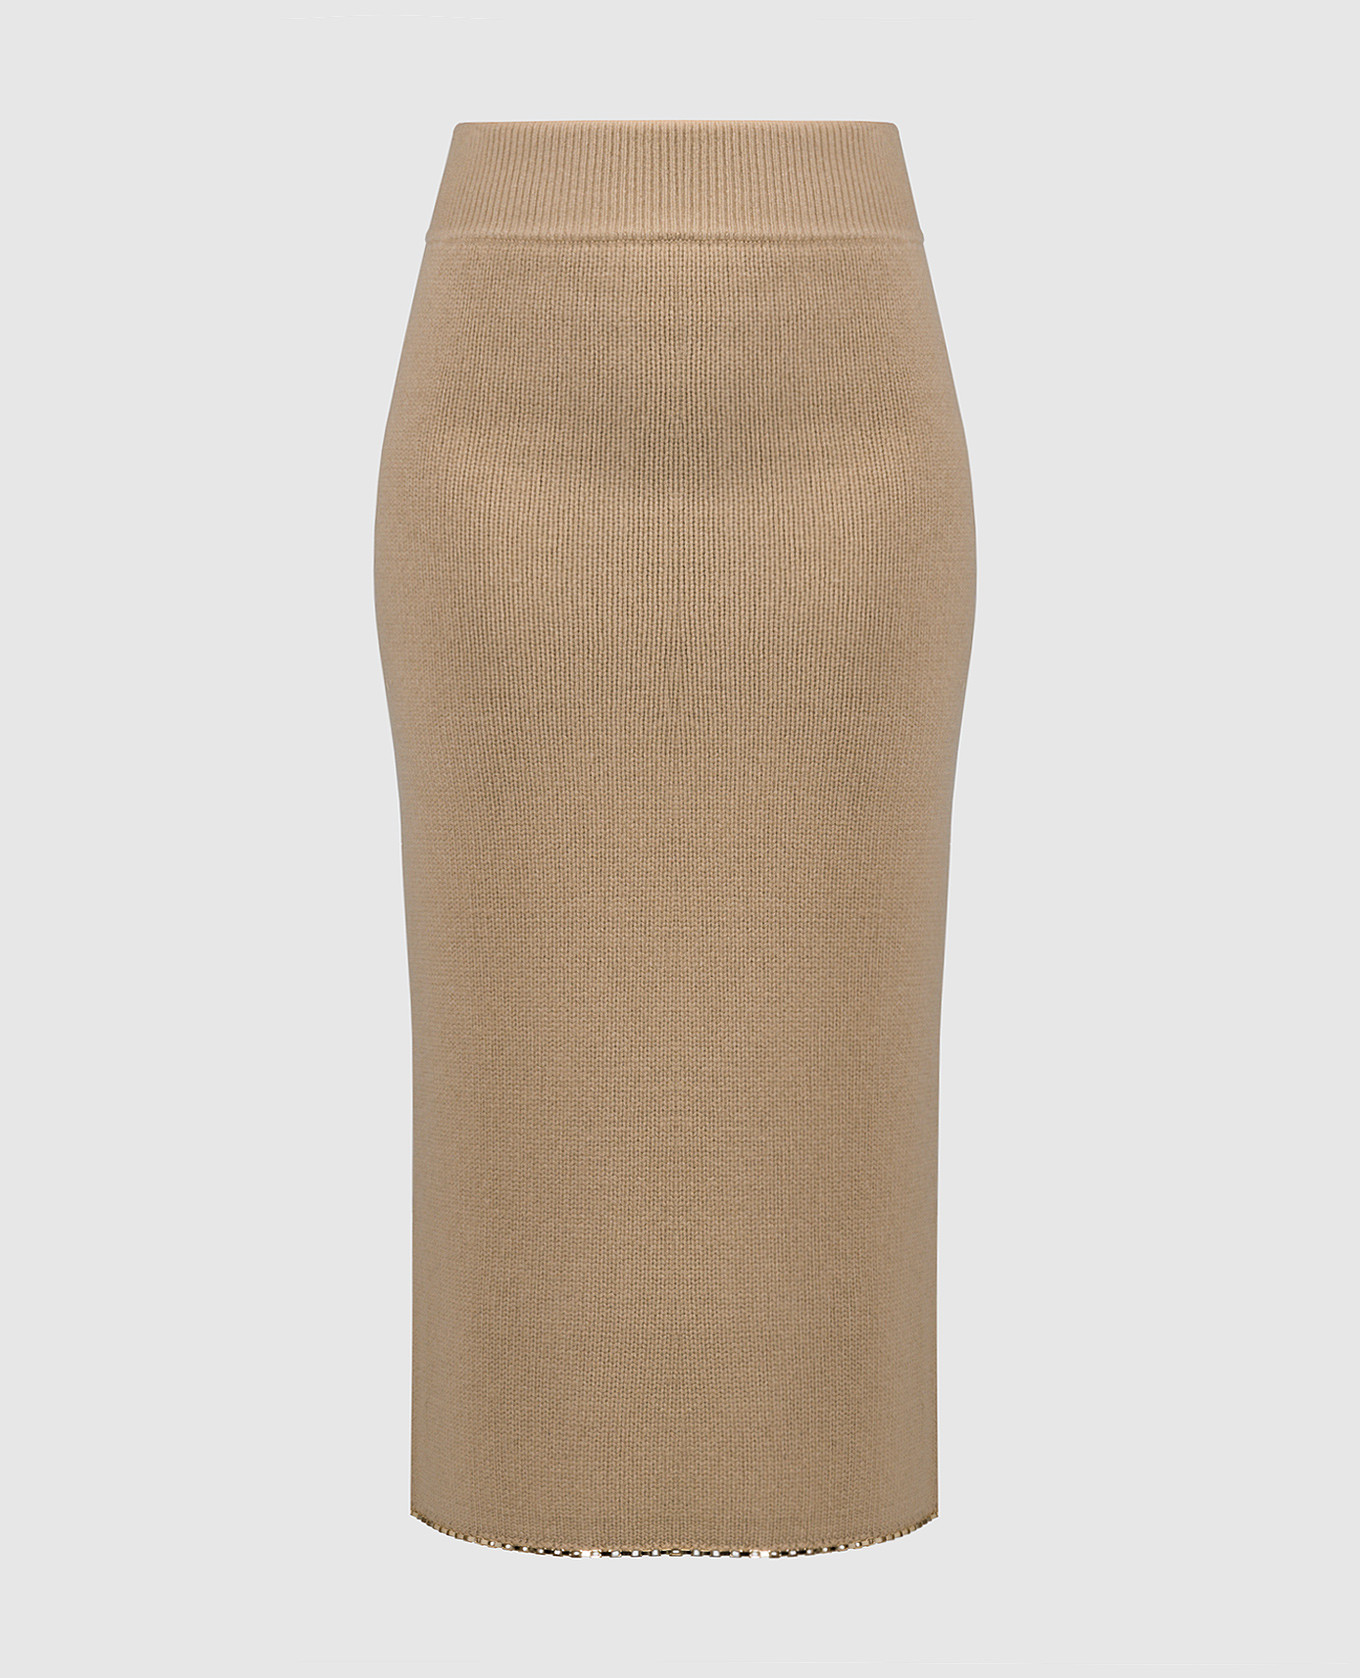 Brown wool and cashmere skirt with chain